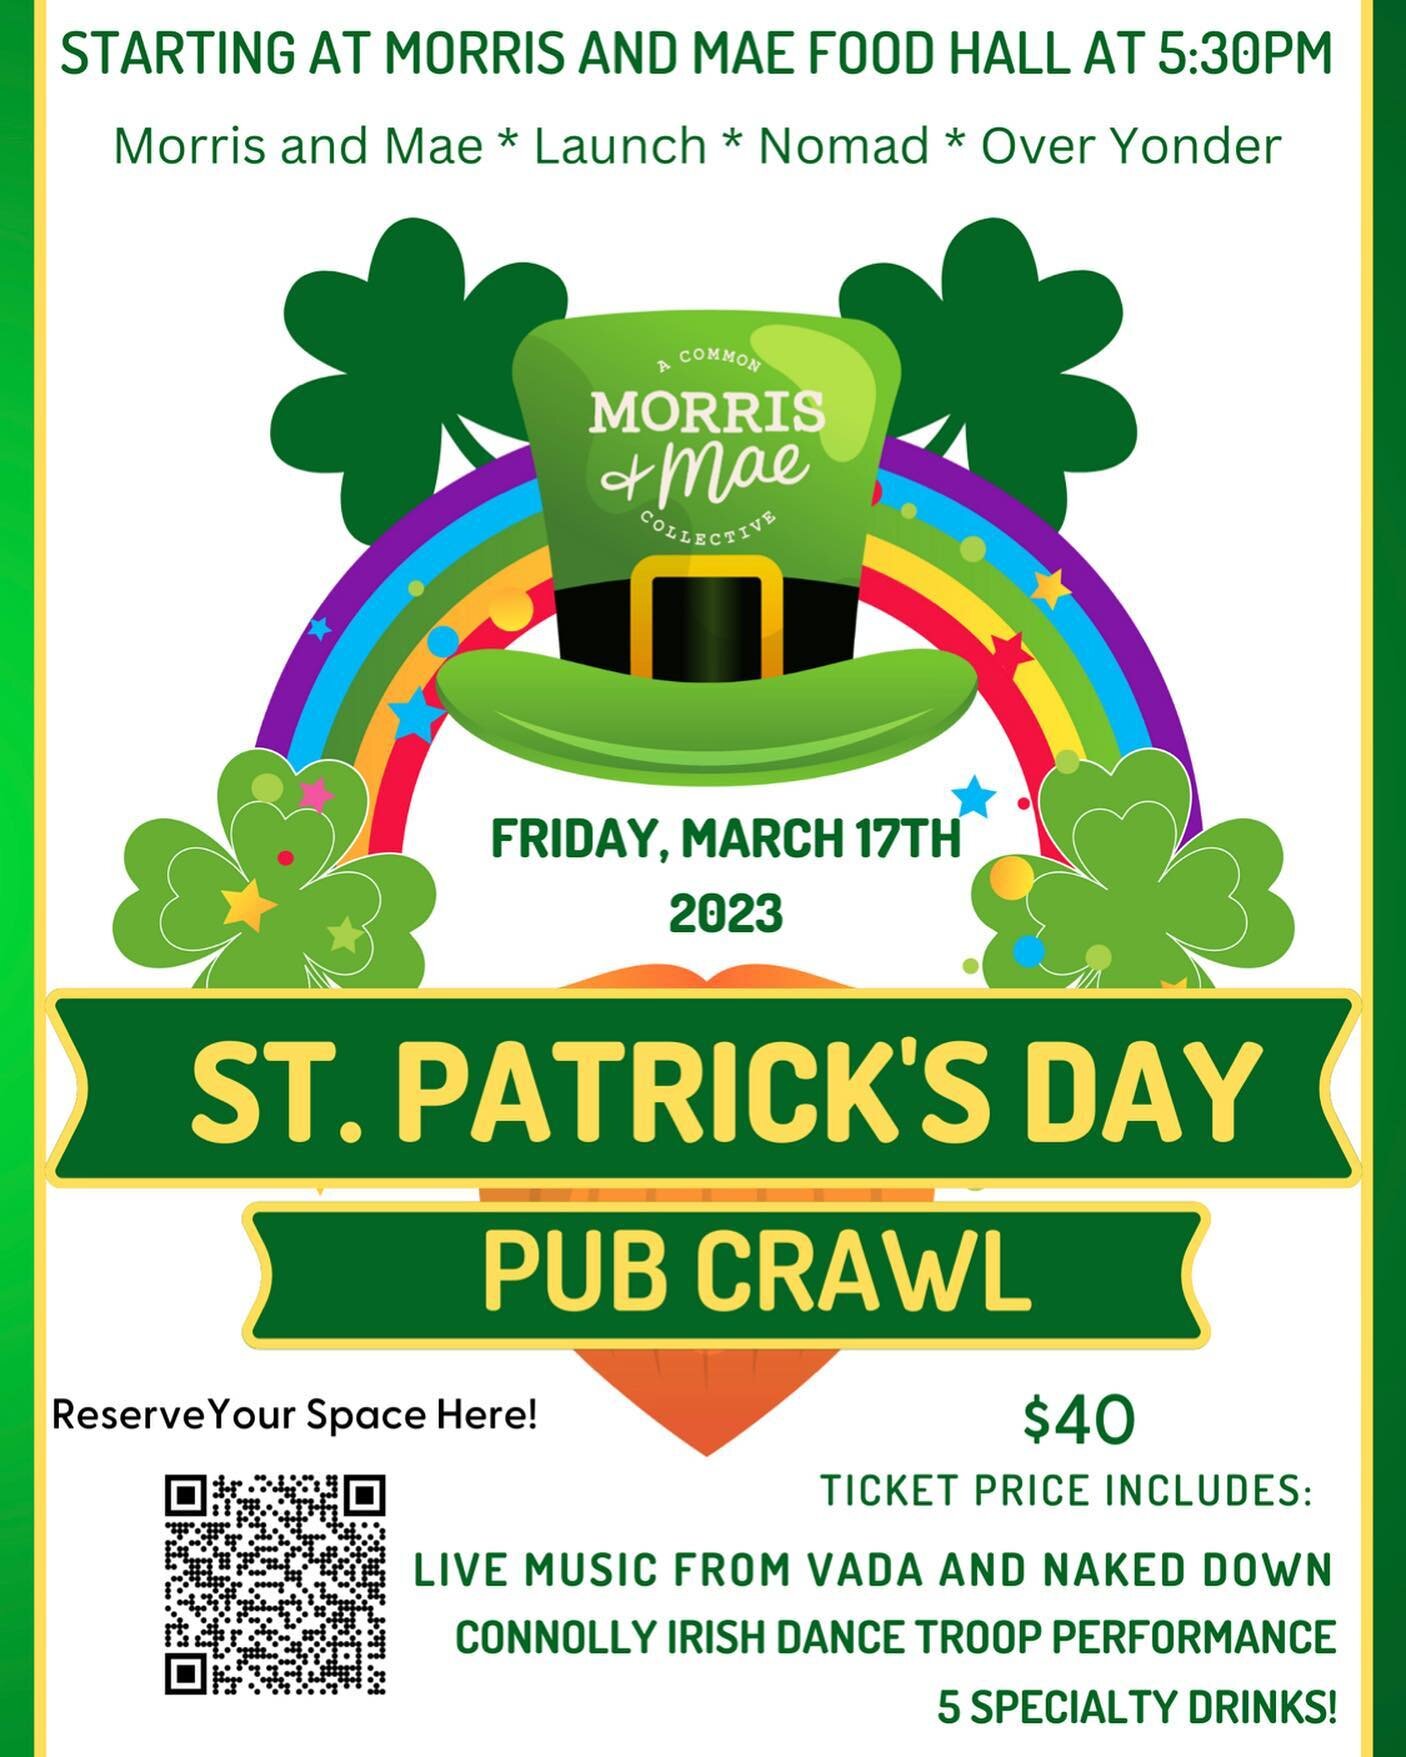 Plan a festive St Patrick&rsquo;s Day evening this Friday with Launch and our friends @morrismaemarket @overyonderbrewing and @nomadredrocks ! Launch will have a unique Irish Cold Brew ready (caffeinated or decaf!). Get your tickets now before they&r